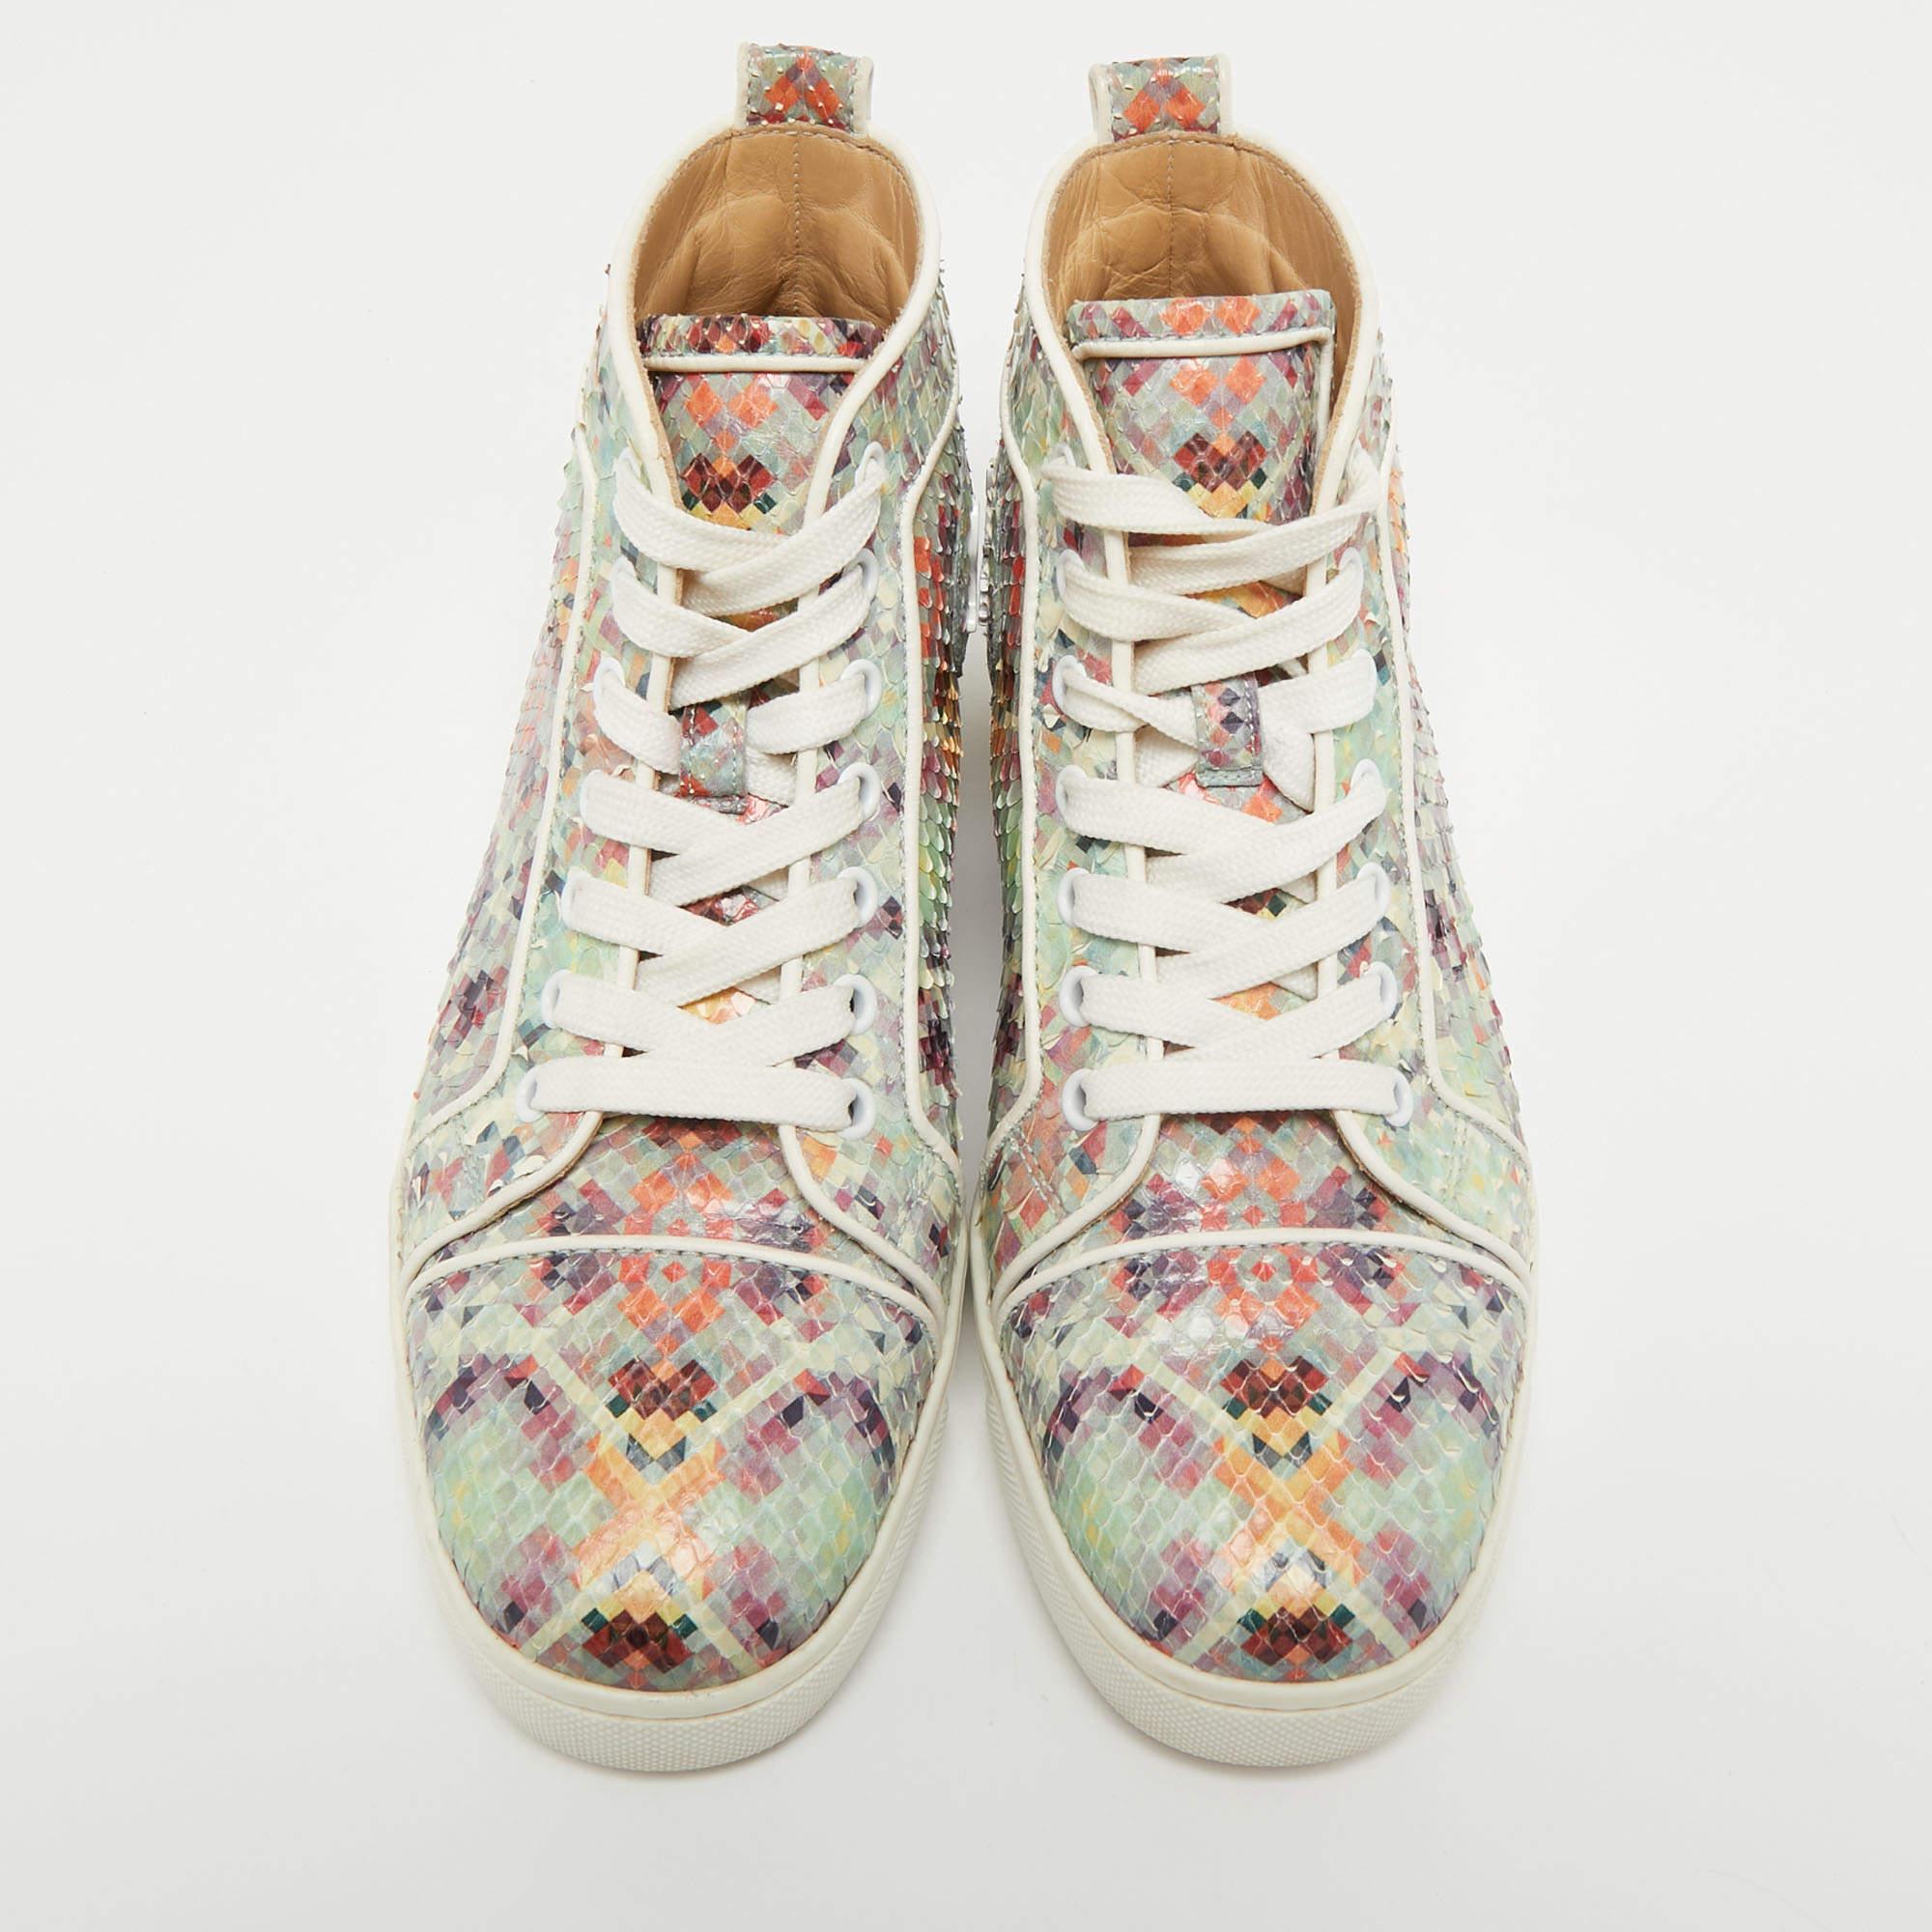 Christian Louboutin Printed Python Louis Orlato High Top Sneakers Size 37 In Excellent Condition For Sale In Dubai, Al Qouz 2